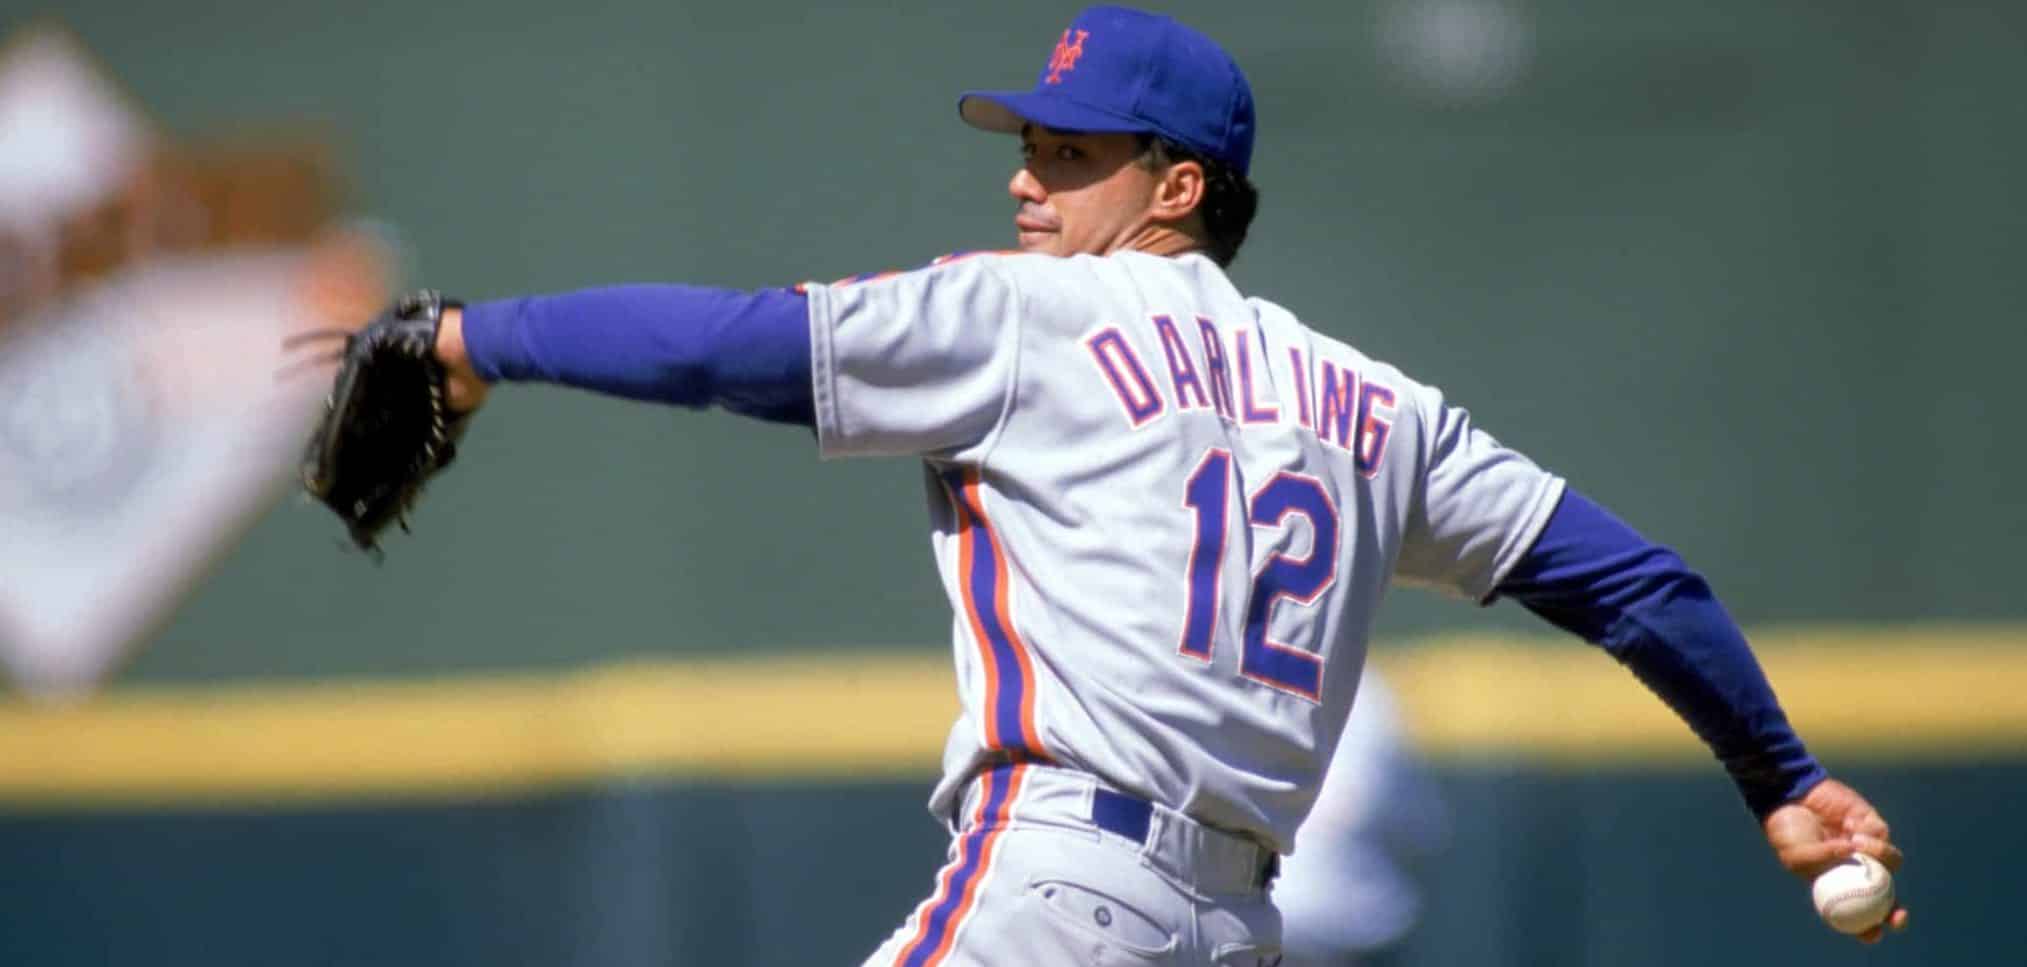 1988: Ron Darling of the New York Mets winds back to pitch during a game in the 1988 season.